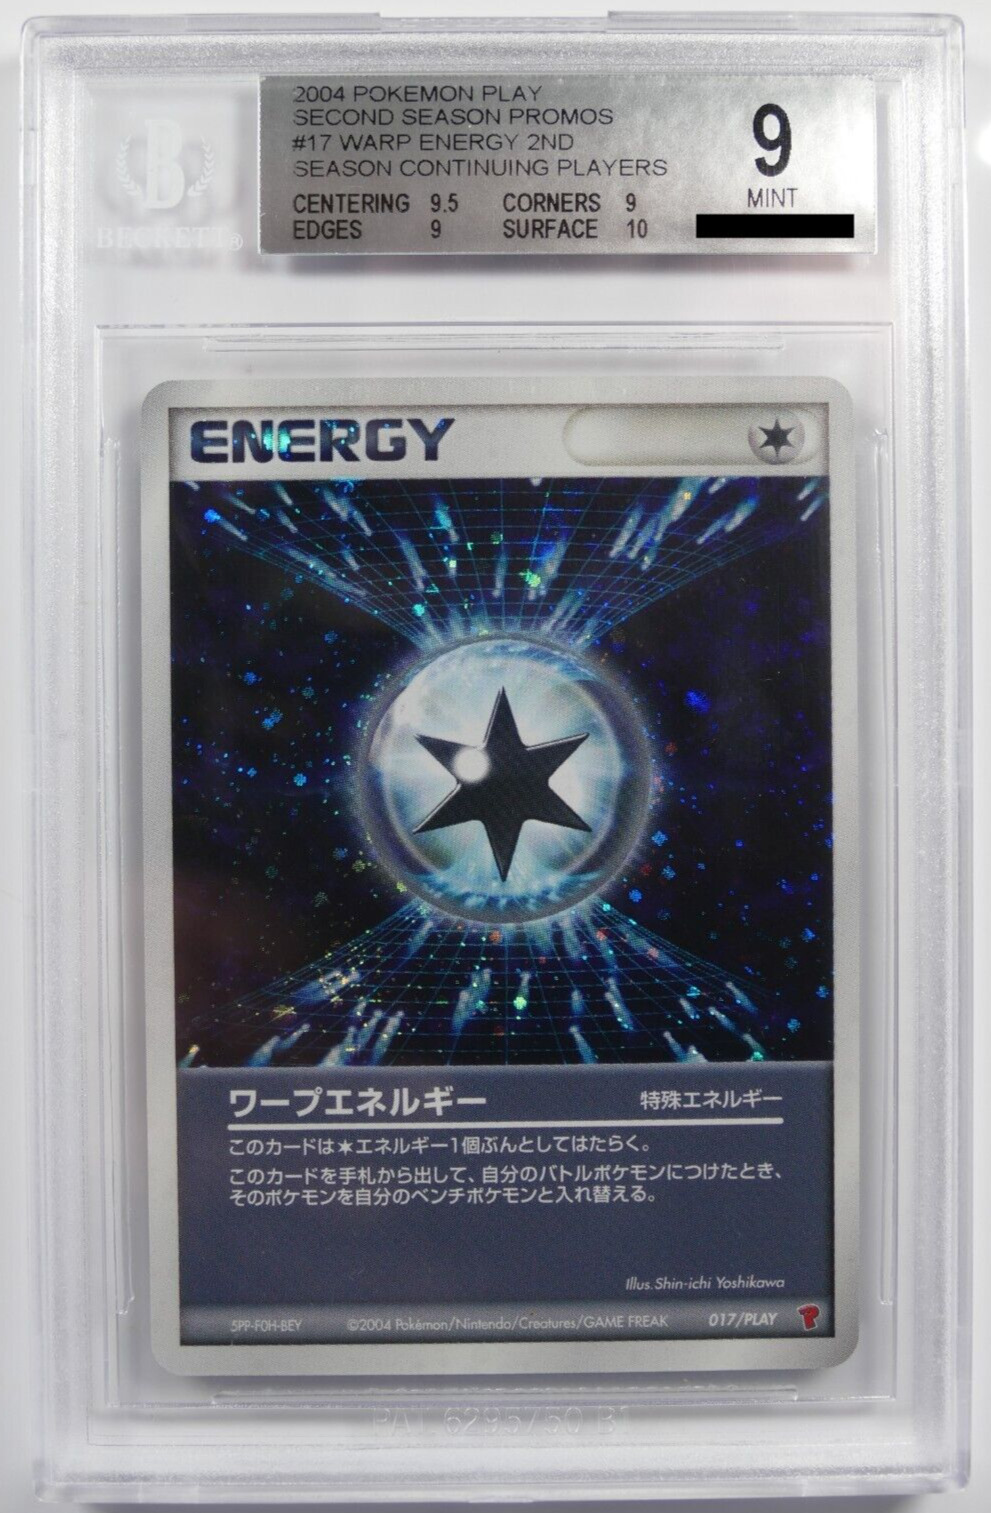 Pokemon 017/Play Warp Energy Holo Play Beckett Mint 9 Only one in the world